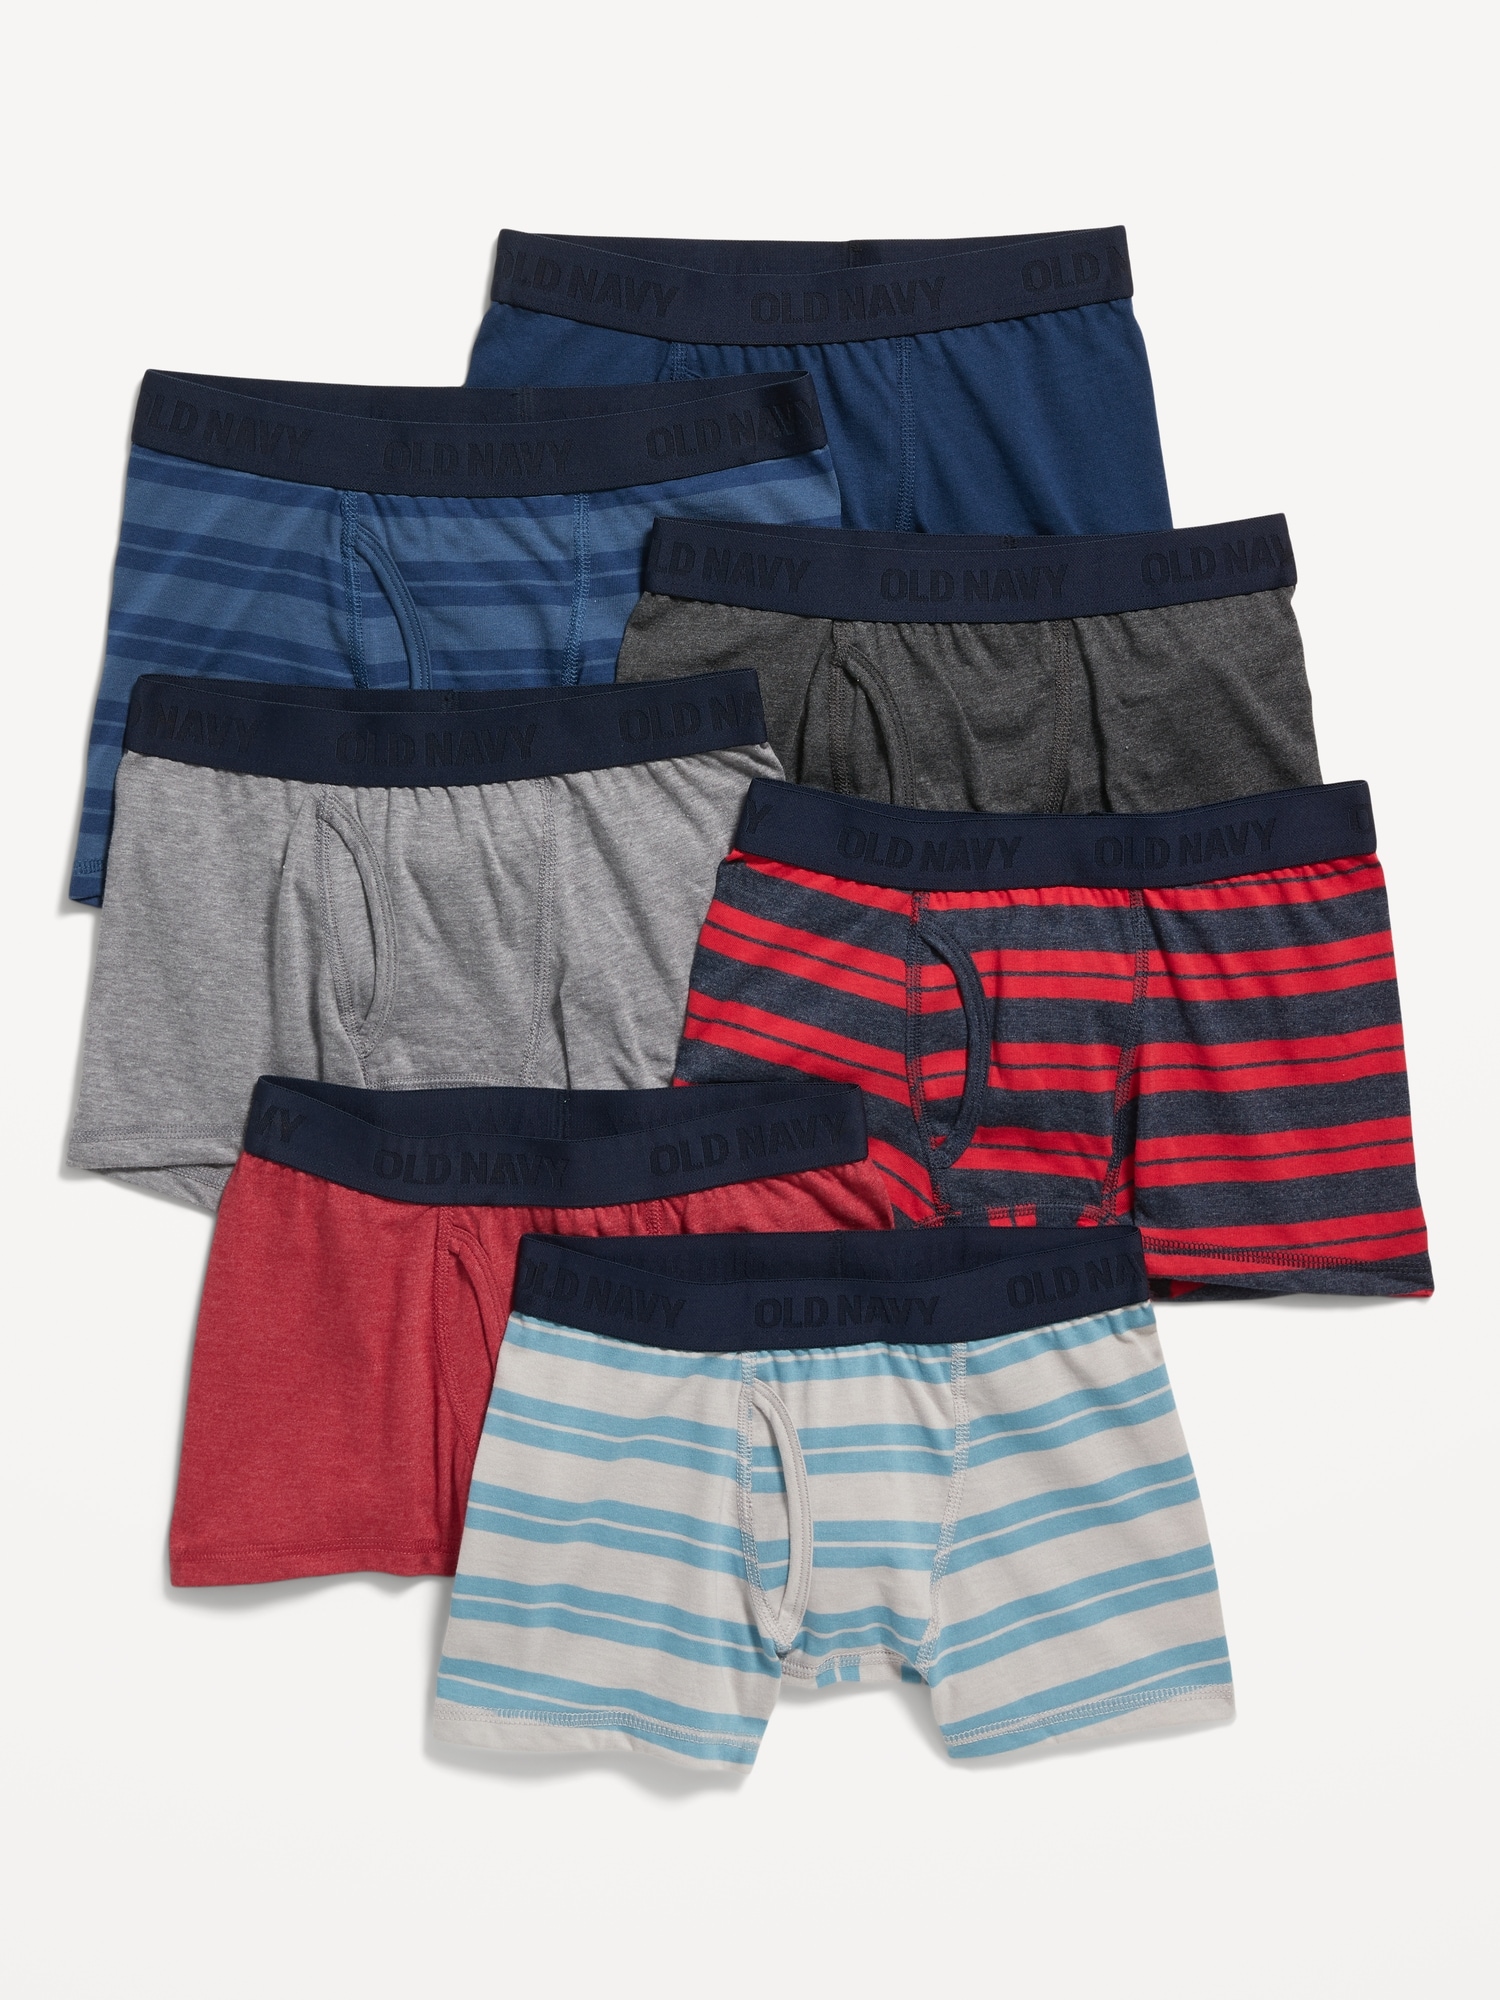 Old Navy Printed Boxer-Briefs Underwear 7-Pack for Boys red - 854497152